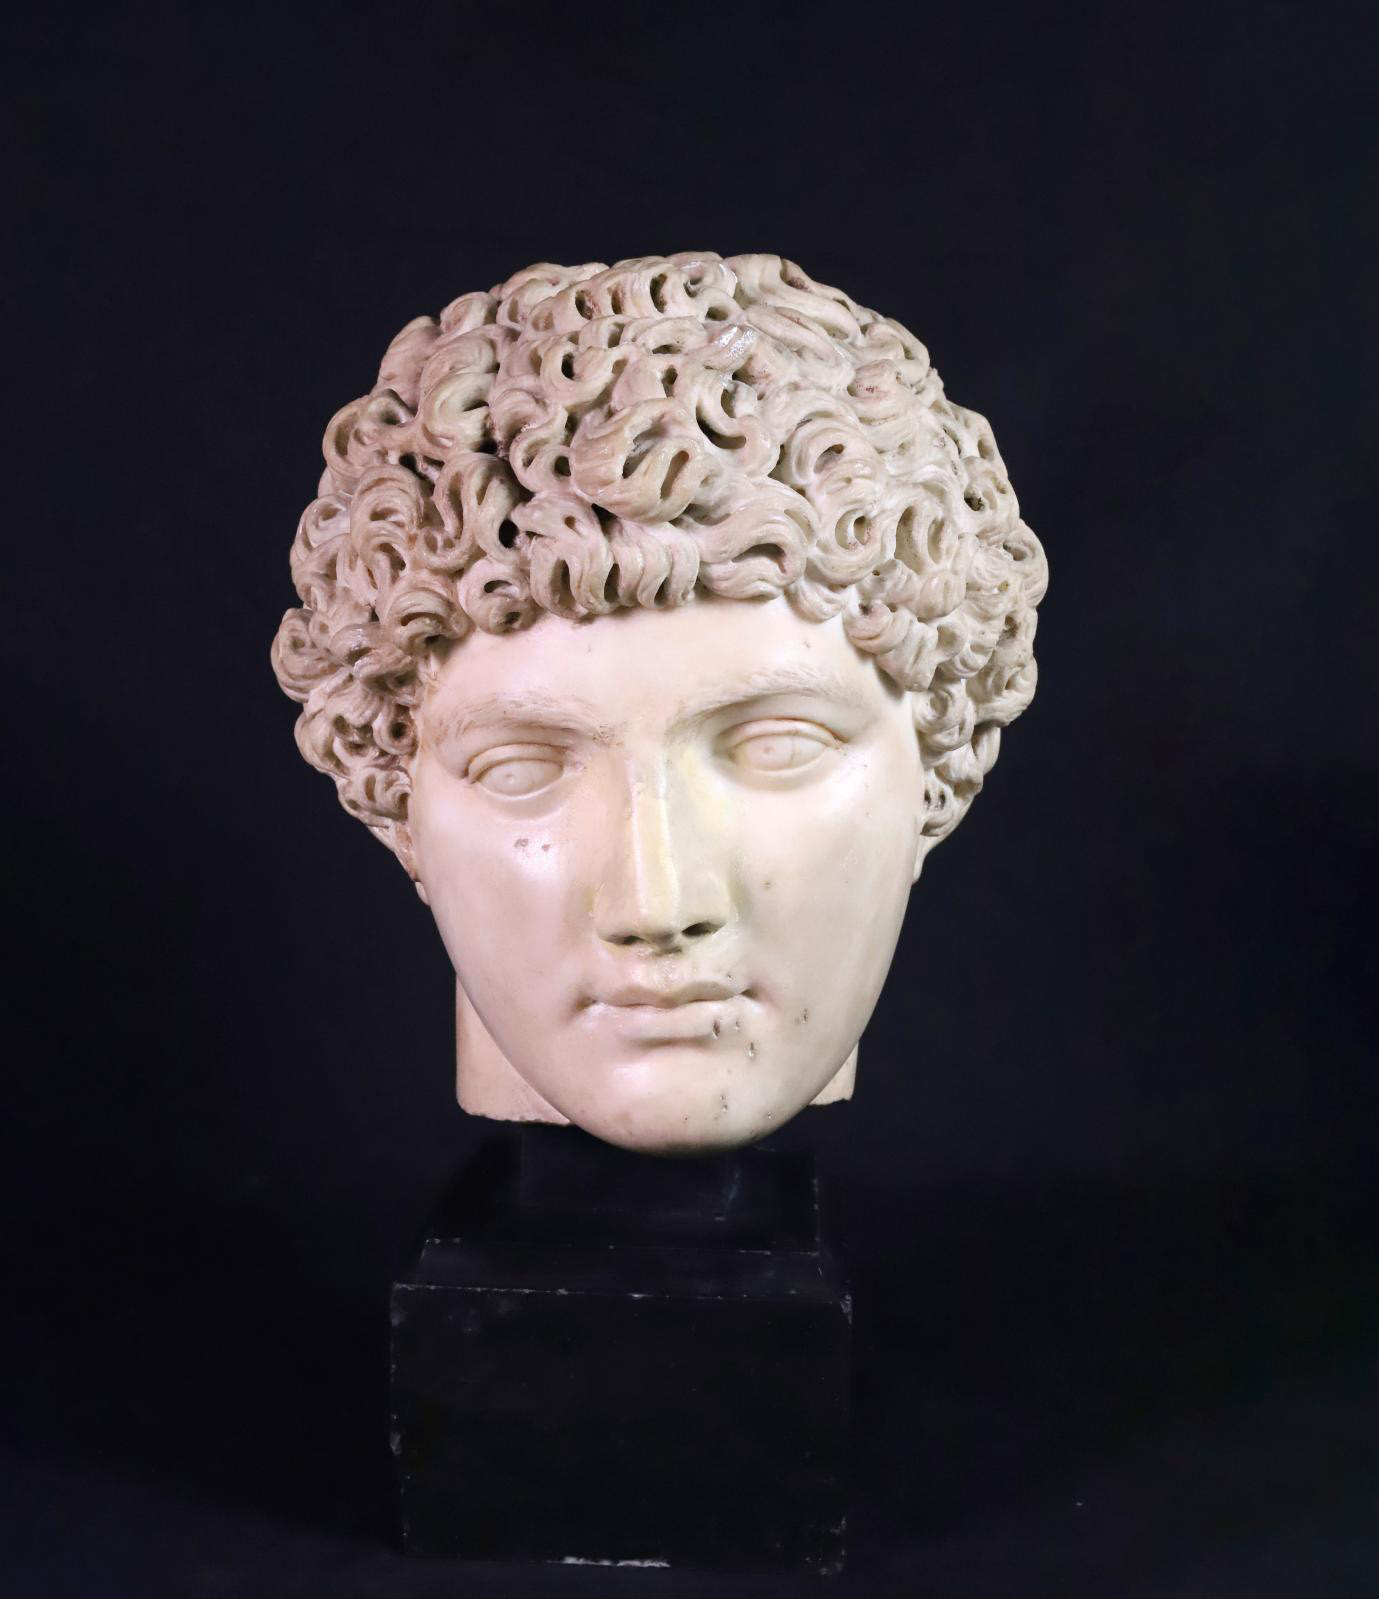 Roman, c. 138–150, Head of a Young Prince, white marble (nose restored in plaster), 26 cm x 23 cm/10.24 x 9.05 in, total height with base 39 cm/15.35 in. Estimate: €150,000/200,000